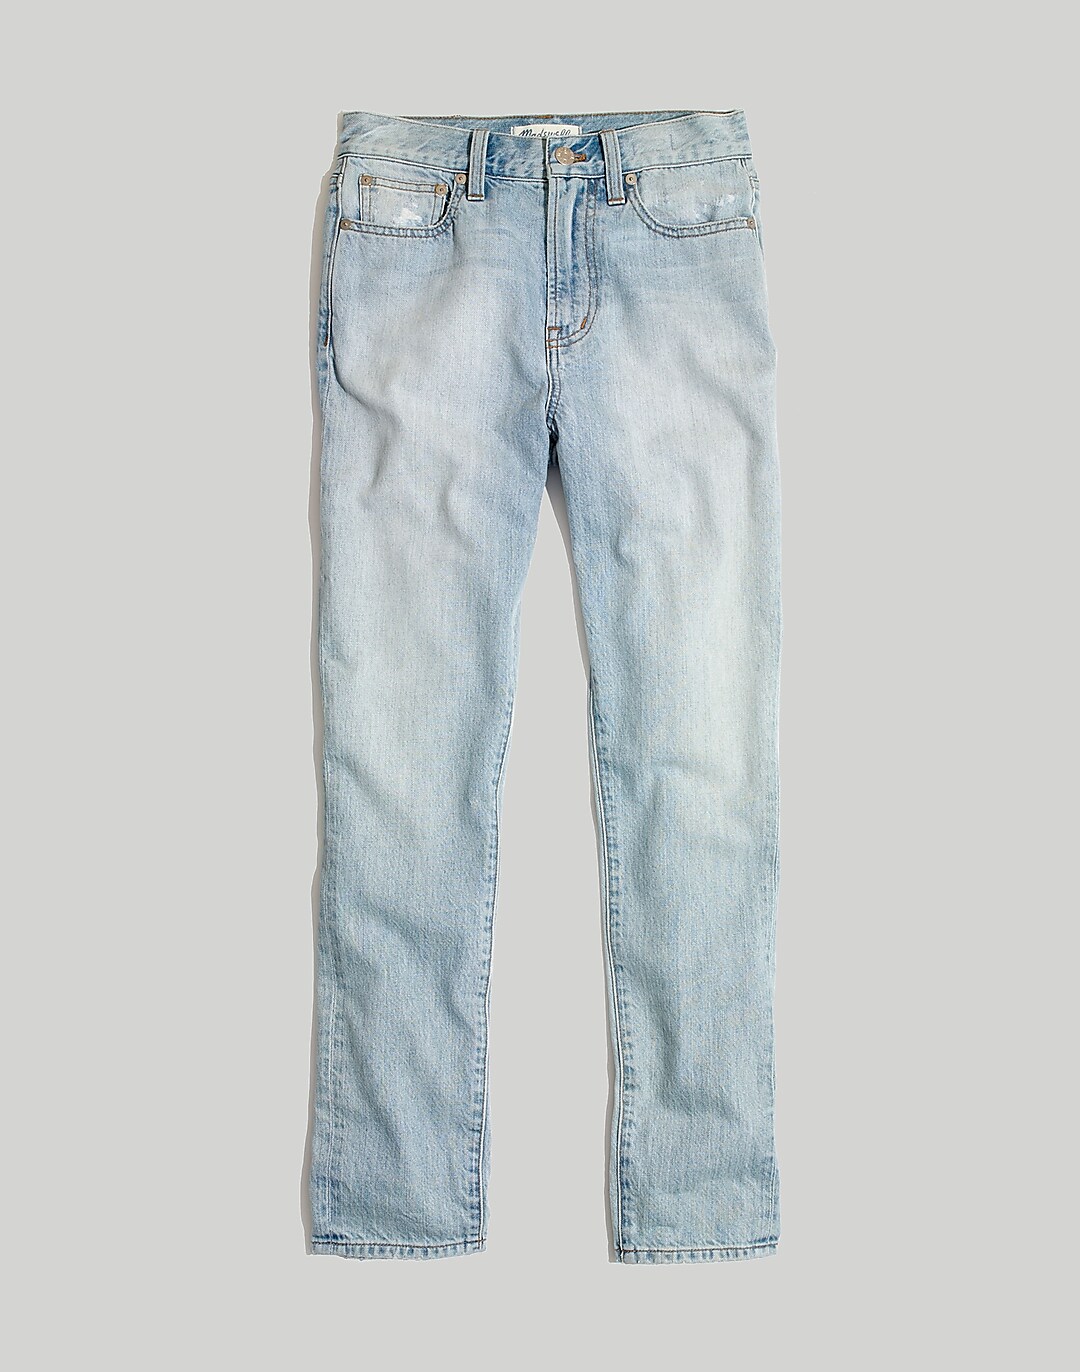 Women's Perfect Vintage Jean in Fitzgerald Wash